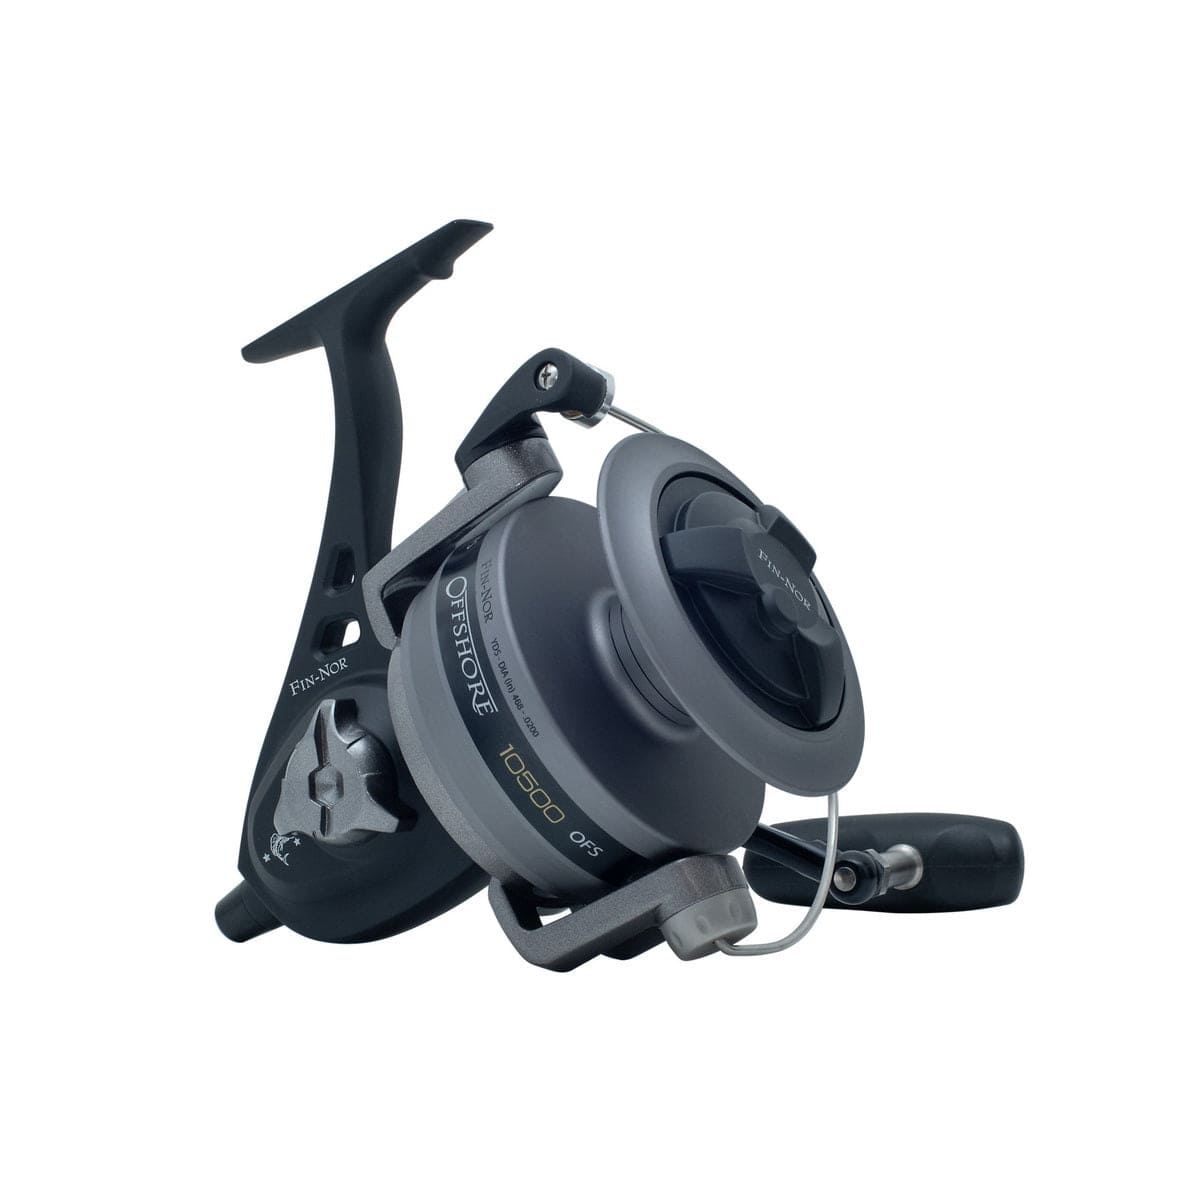 Fin-Nor Offshore Spin Reel - MatchFishing